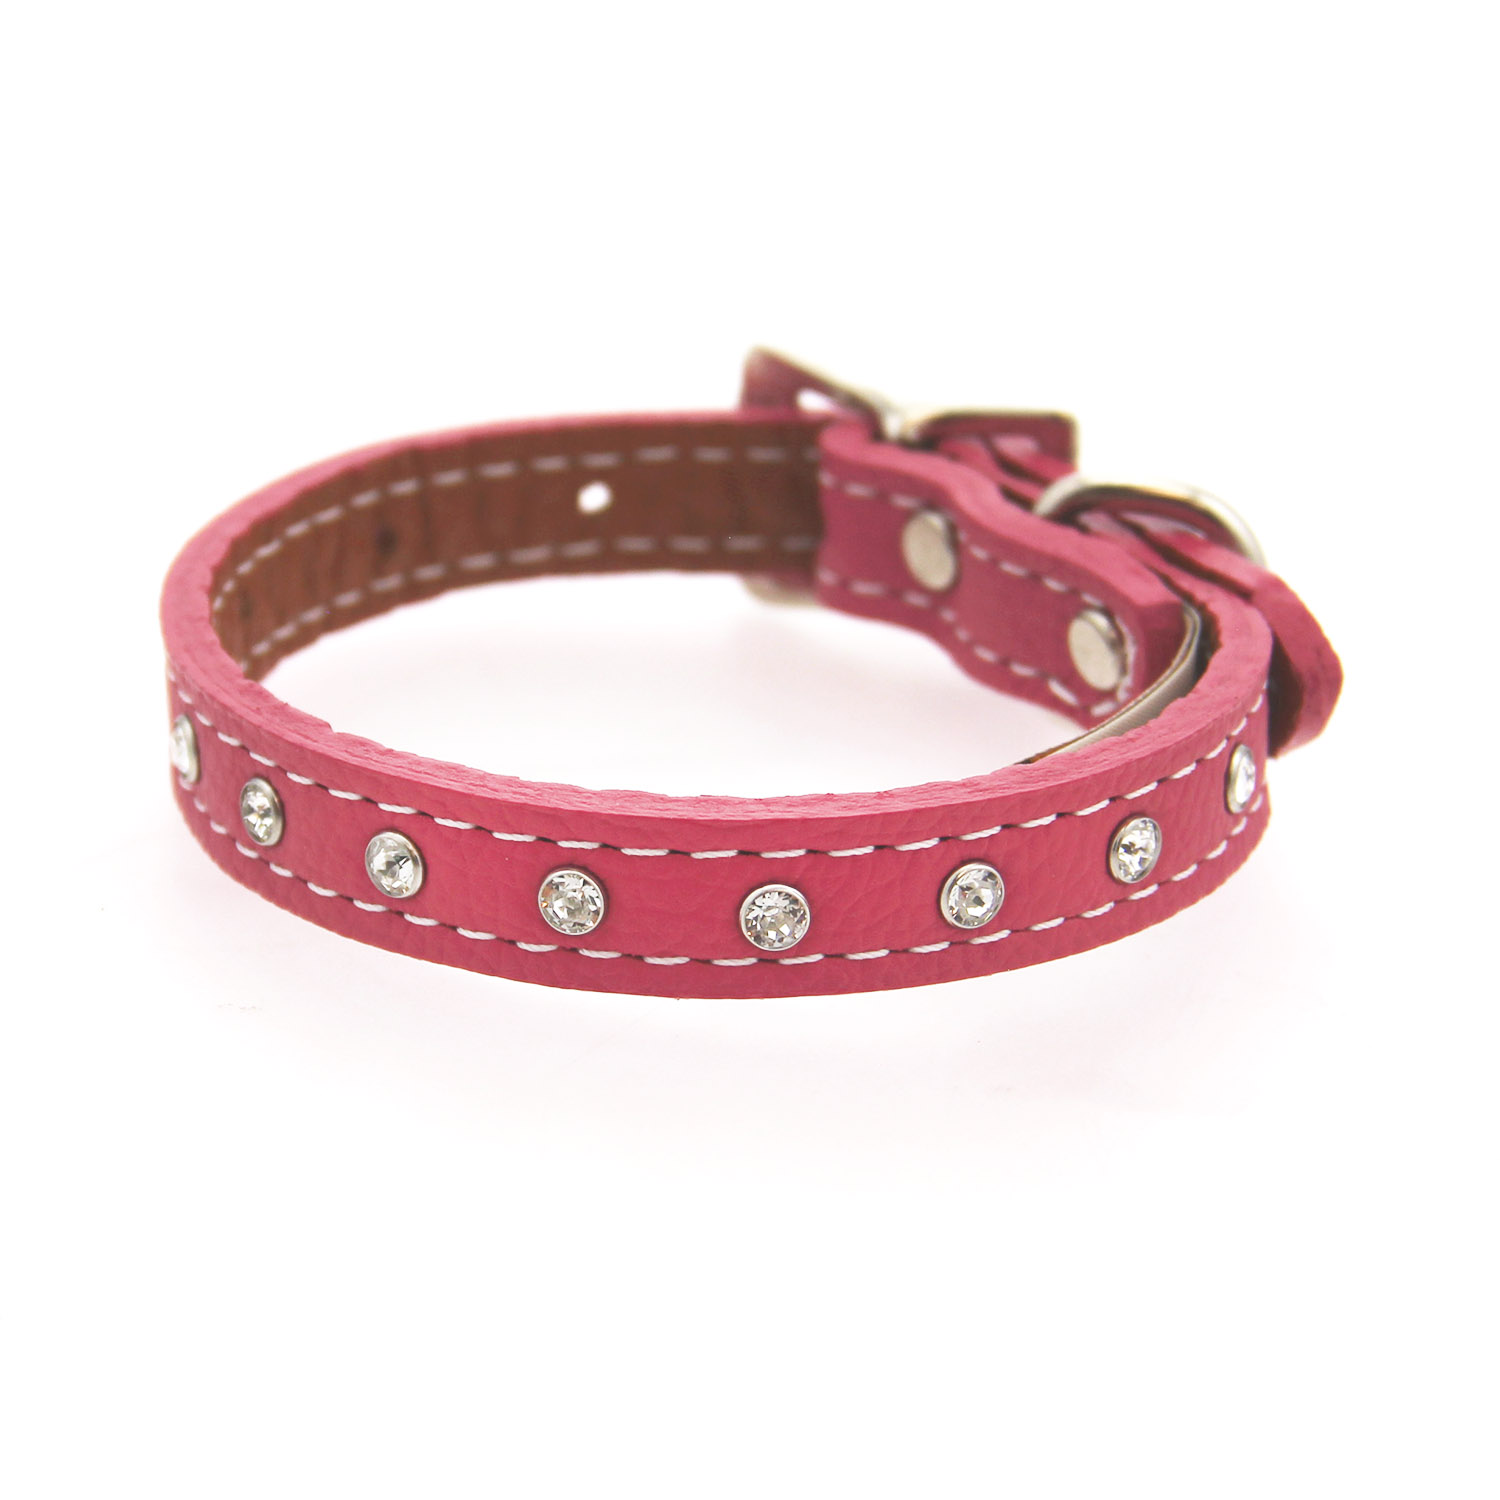 Auburn Leathercrafters Tuscan Crystallized Leather Dog Collar - Pink